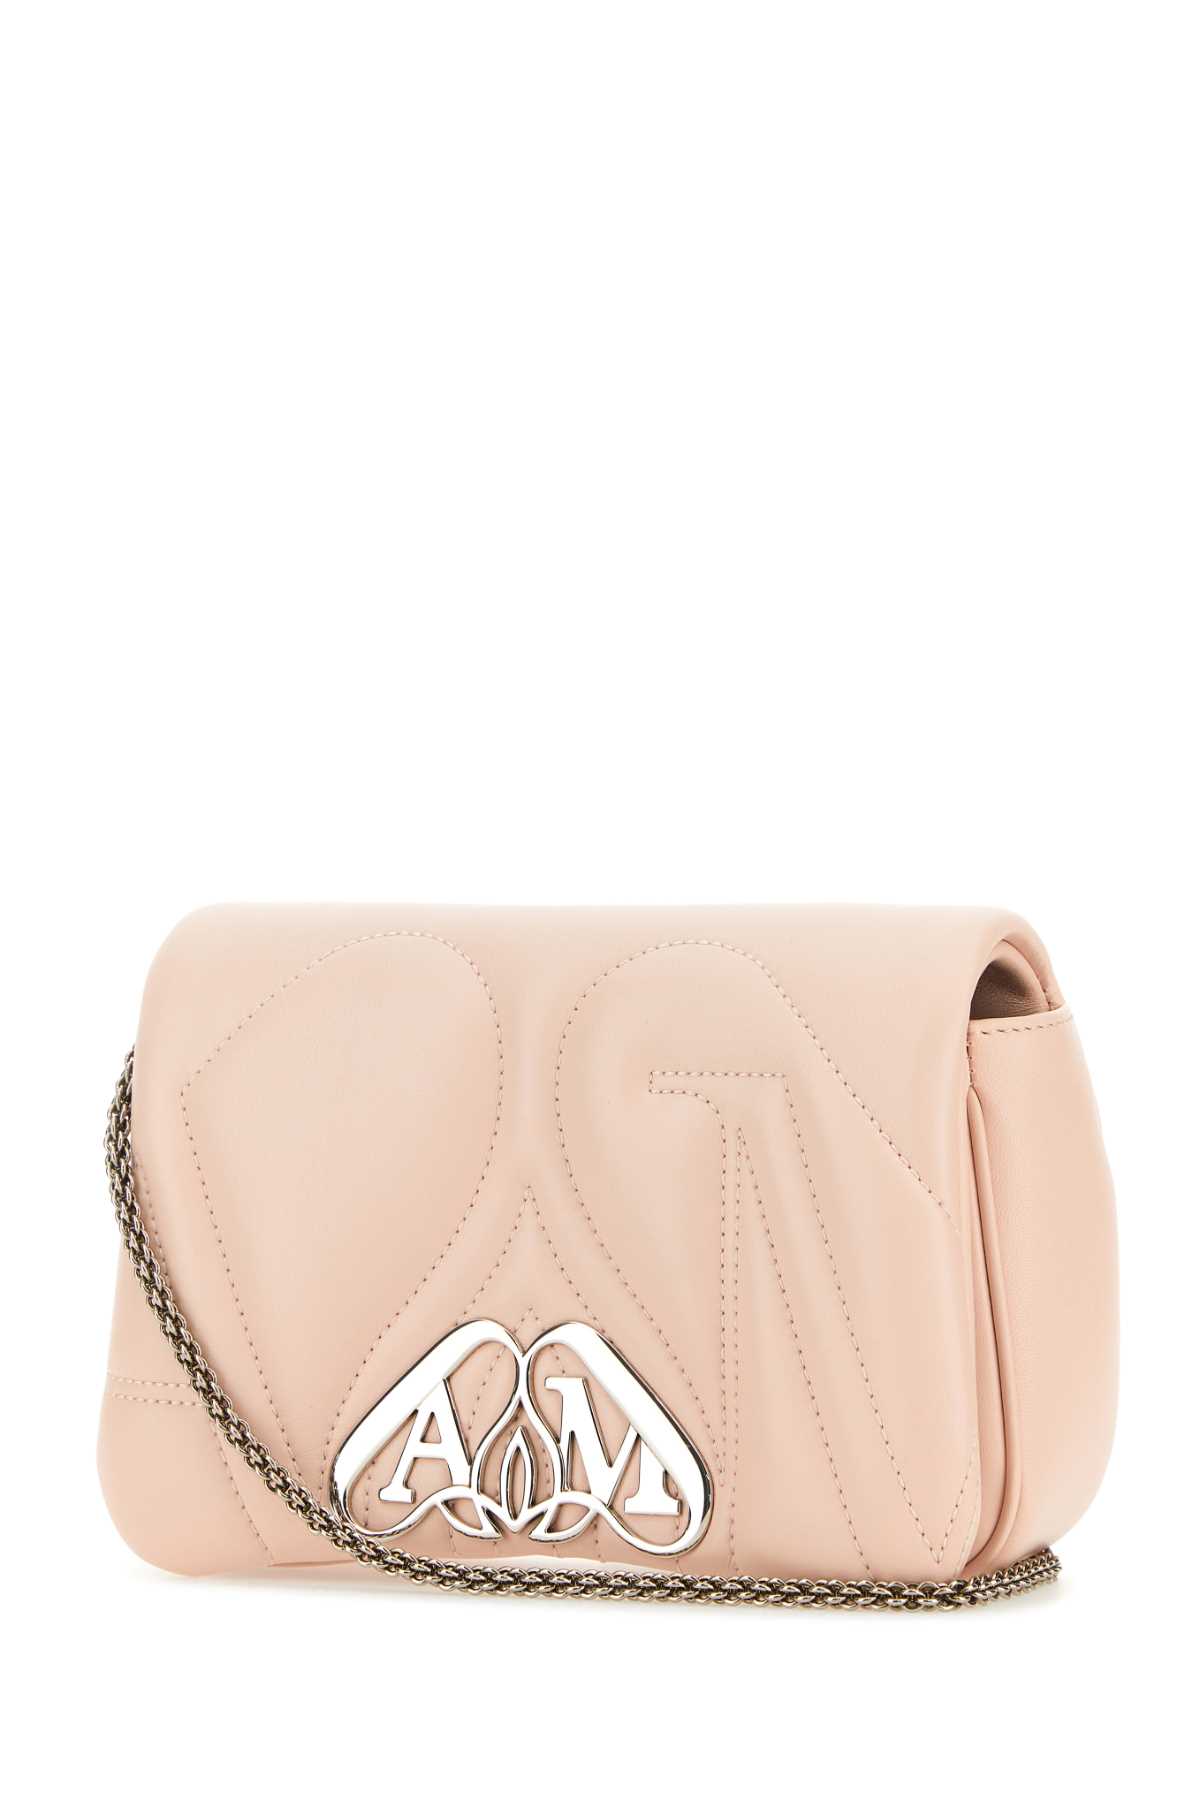 Alexander Mcqueen Pastel Pink Leather Mini Seal Clutch In Clay